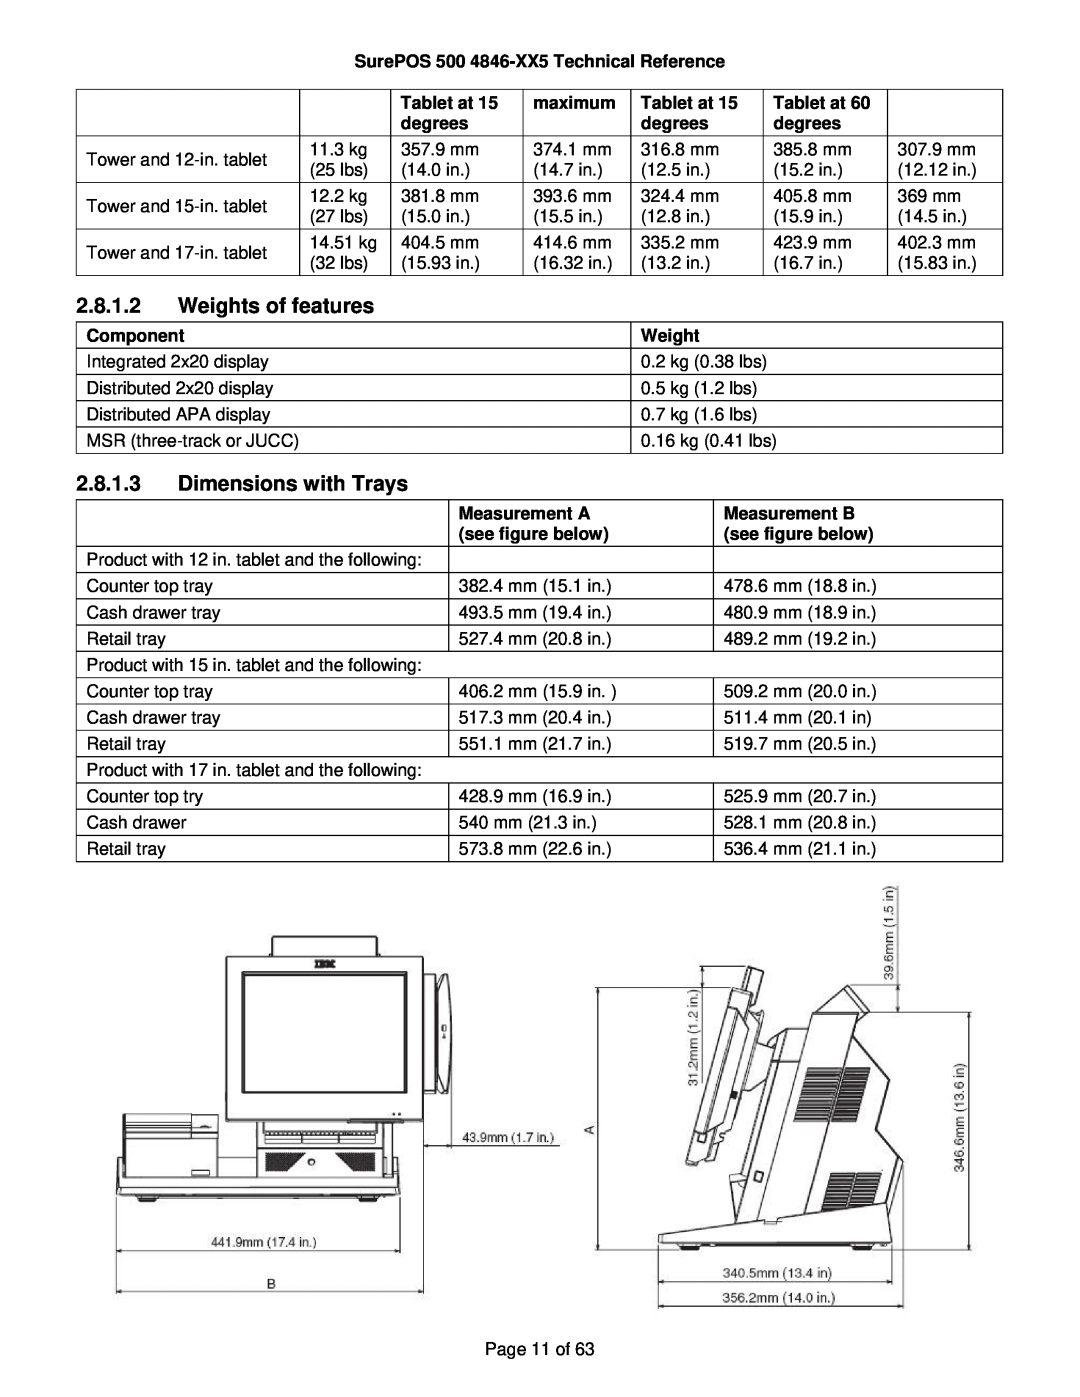 IBM 500 manual 2.8.1.2, Weights of features, 2.8.1.3, Dimensions with Trays 